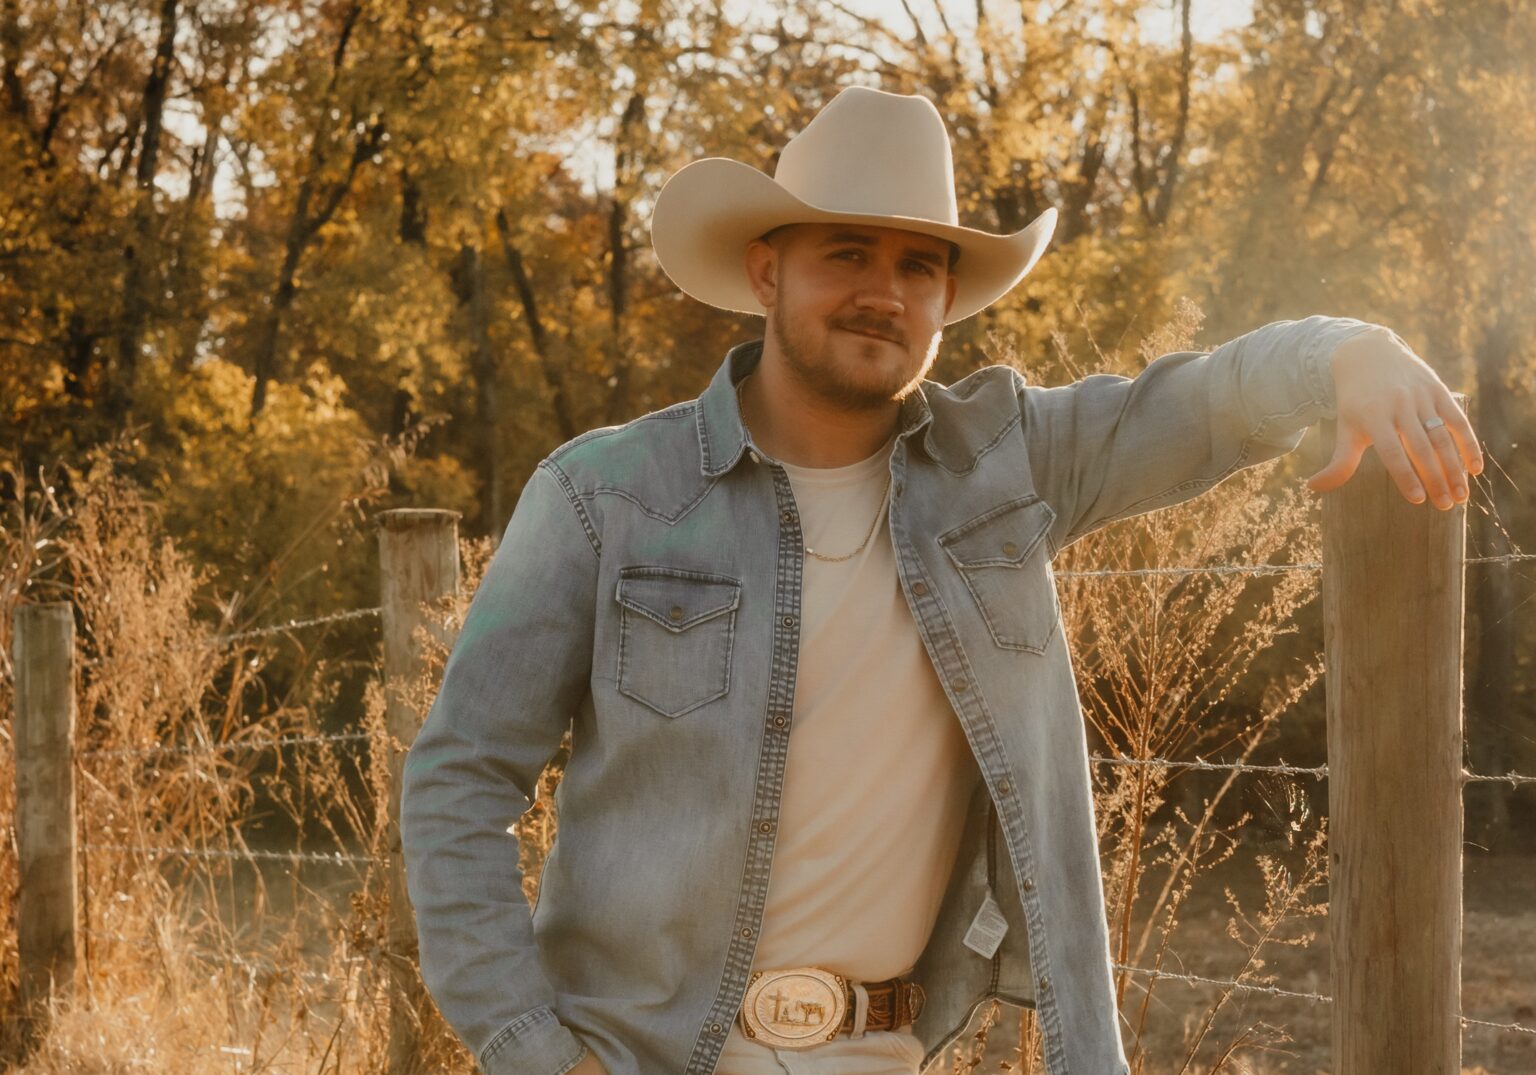 Drew Parker Releases His Label Debut EP, “At the End of the Dirt Road,” Featuring an Extra Special Track With His Wife (Exclusive)